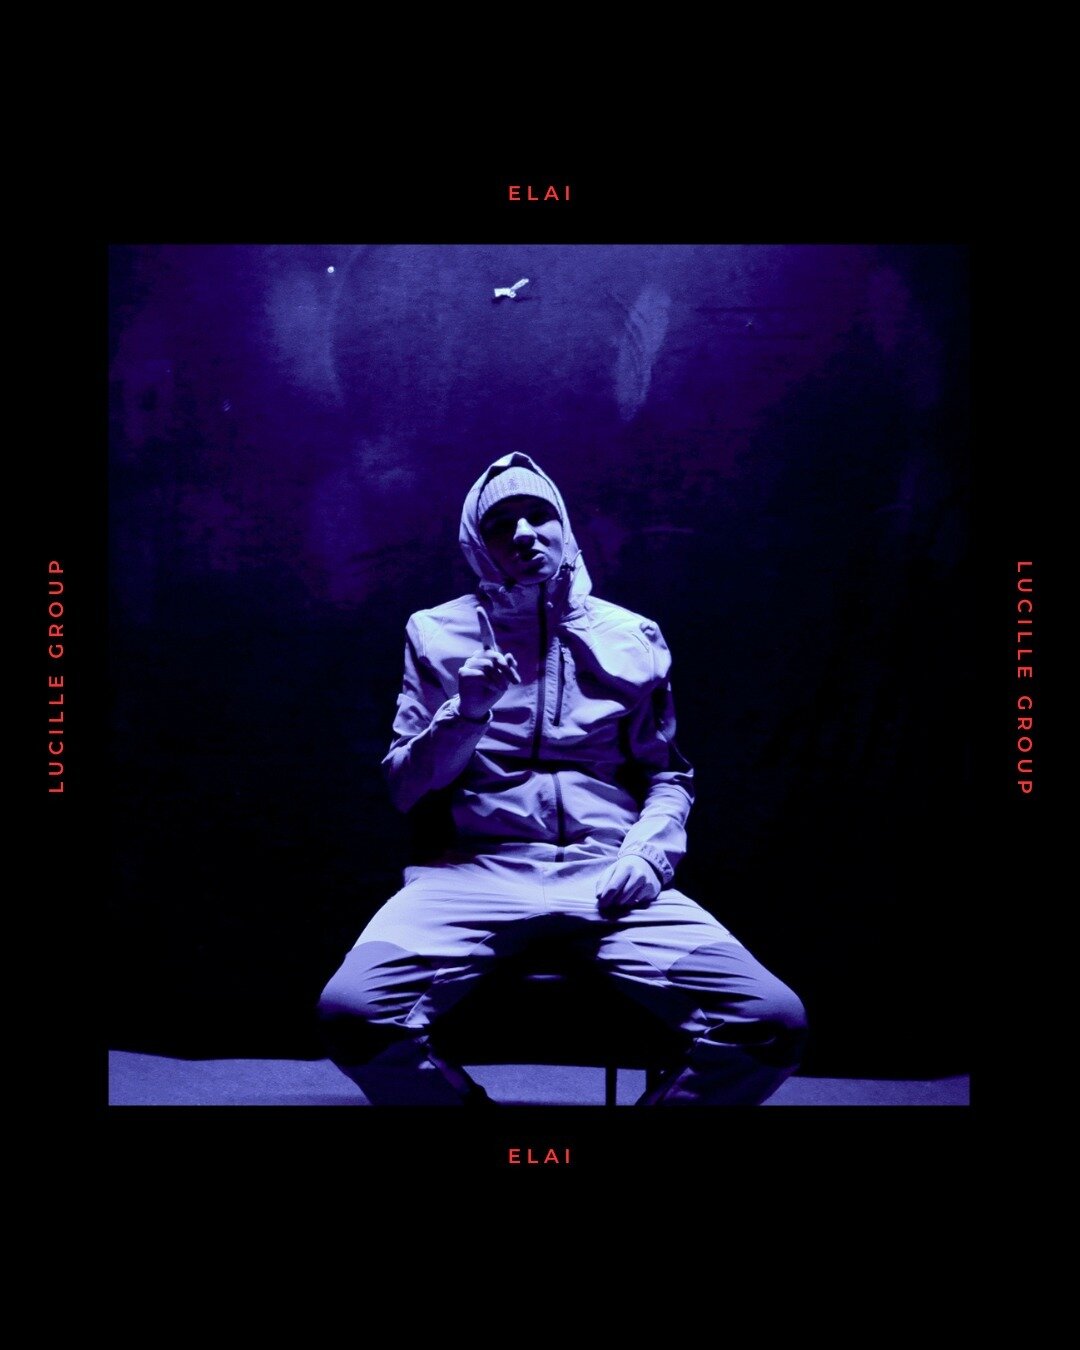 The Albanian rapper ELAI started making beats when he was only 7 years old, eventually leading him to produce songs for some of the biggest artists in Sweden. He was nominated for a Swedish Grammis in 2022, recognizing his impressive work as a produc